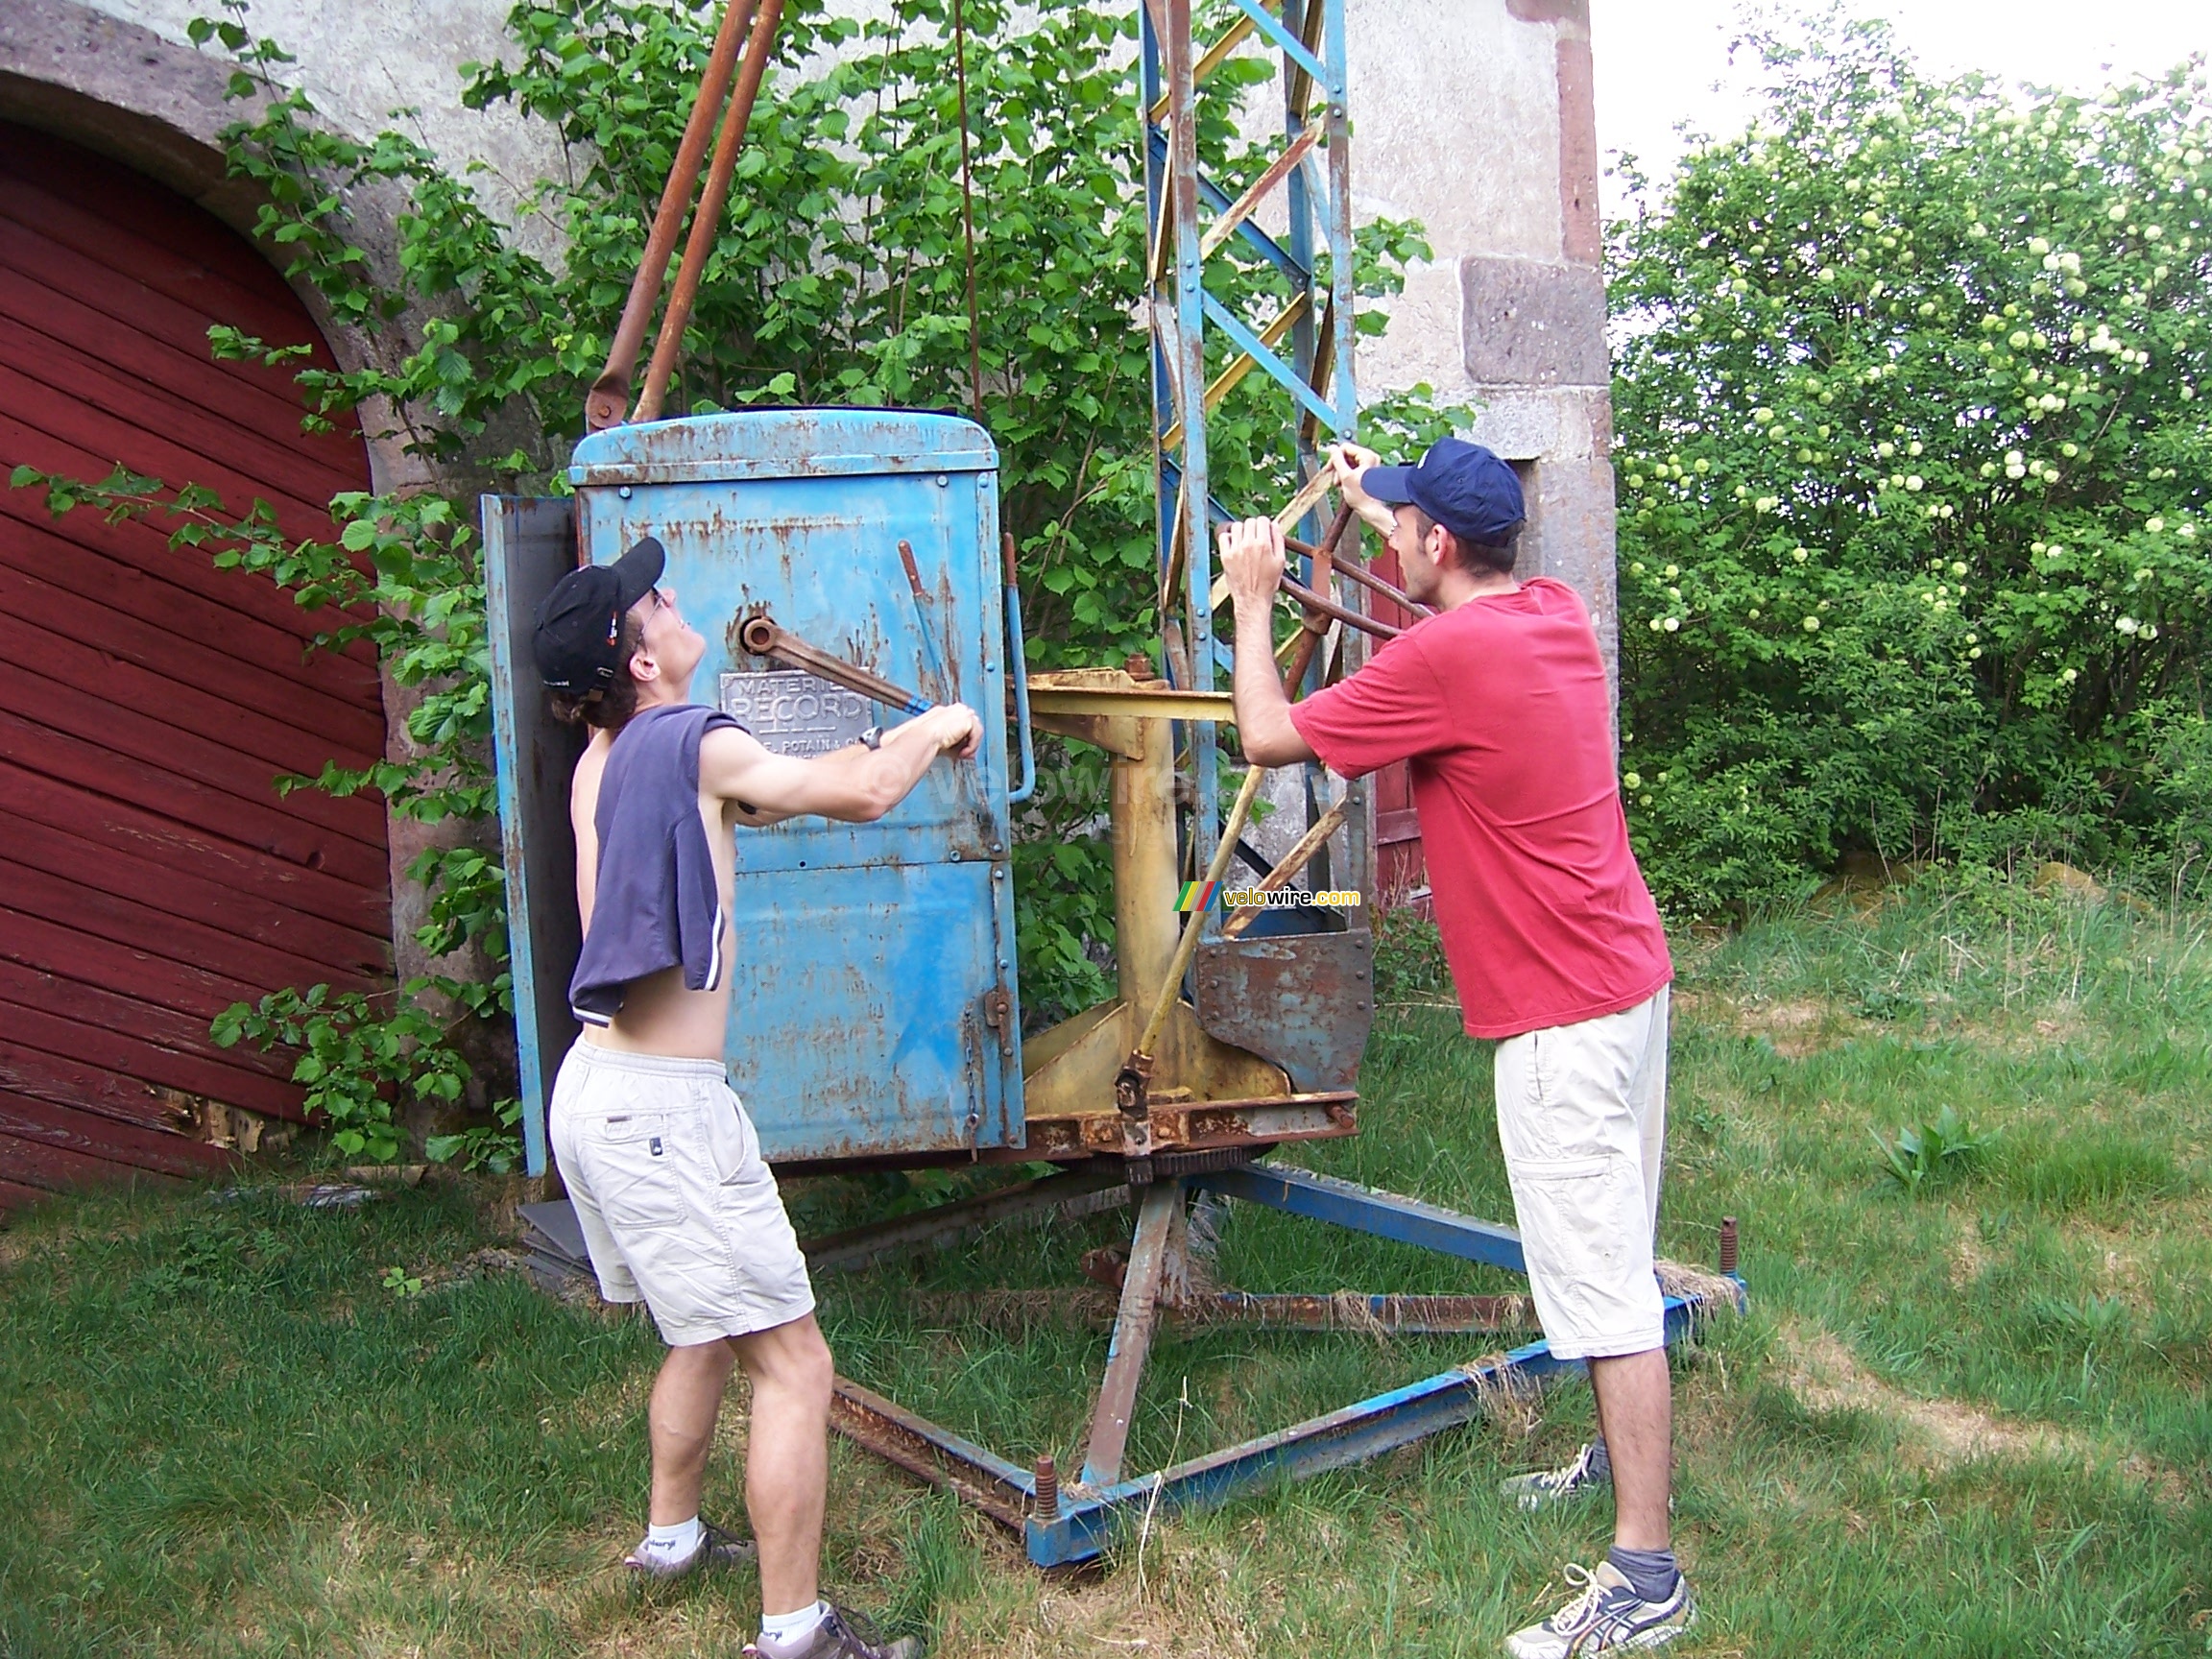 Florent and Bernie play with an abandoned manual crane